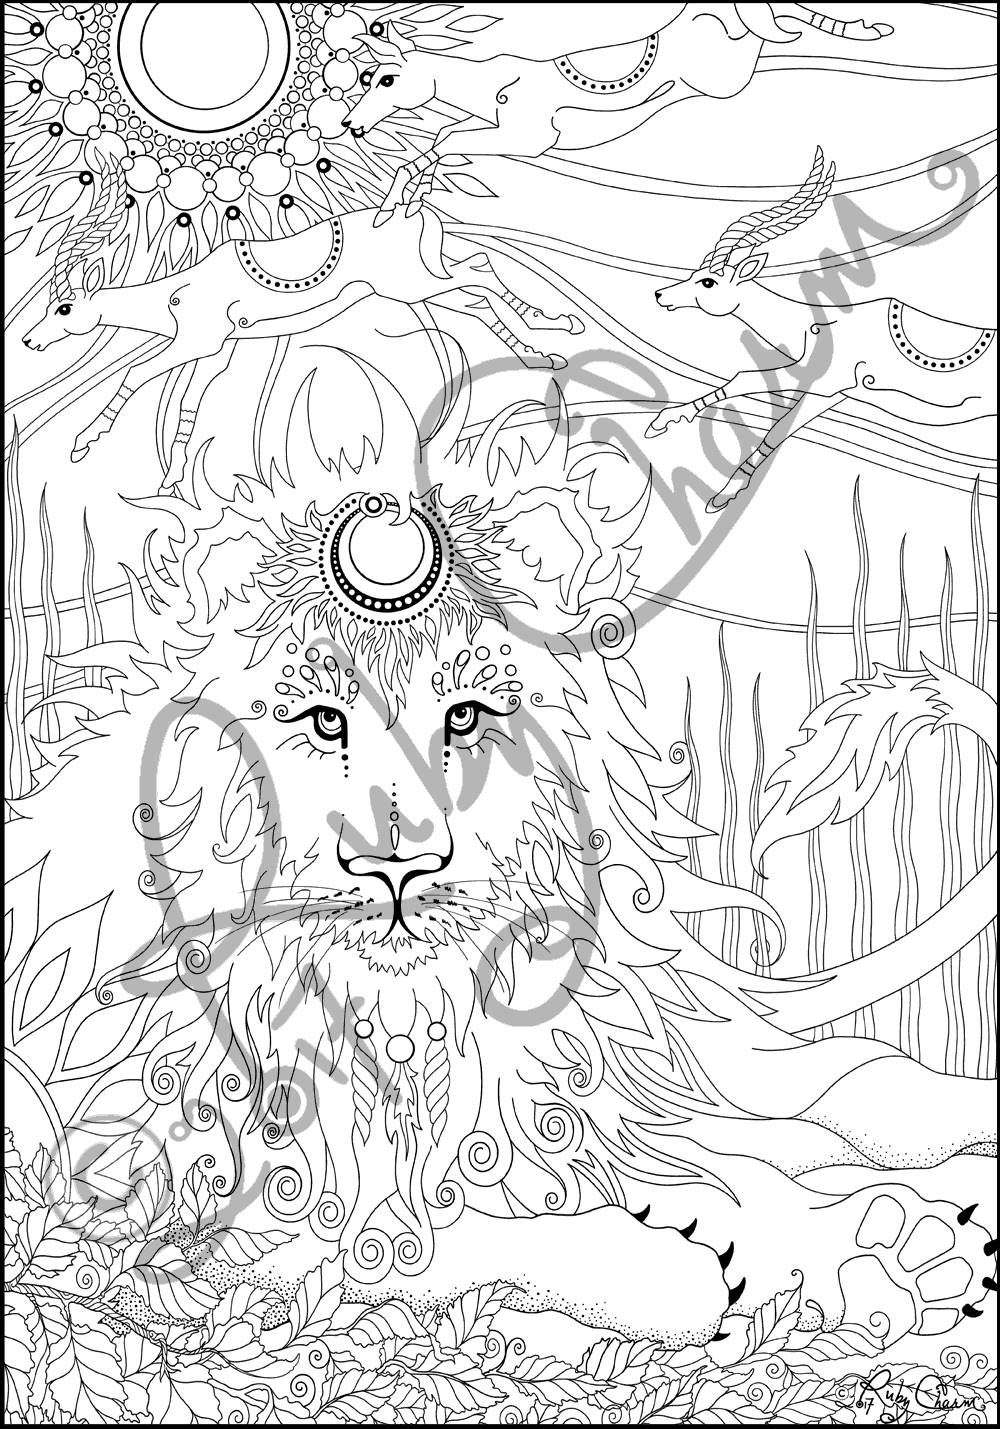 Lion with gazelles: downloadable printable 2-page PDF for coloring ...